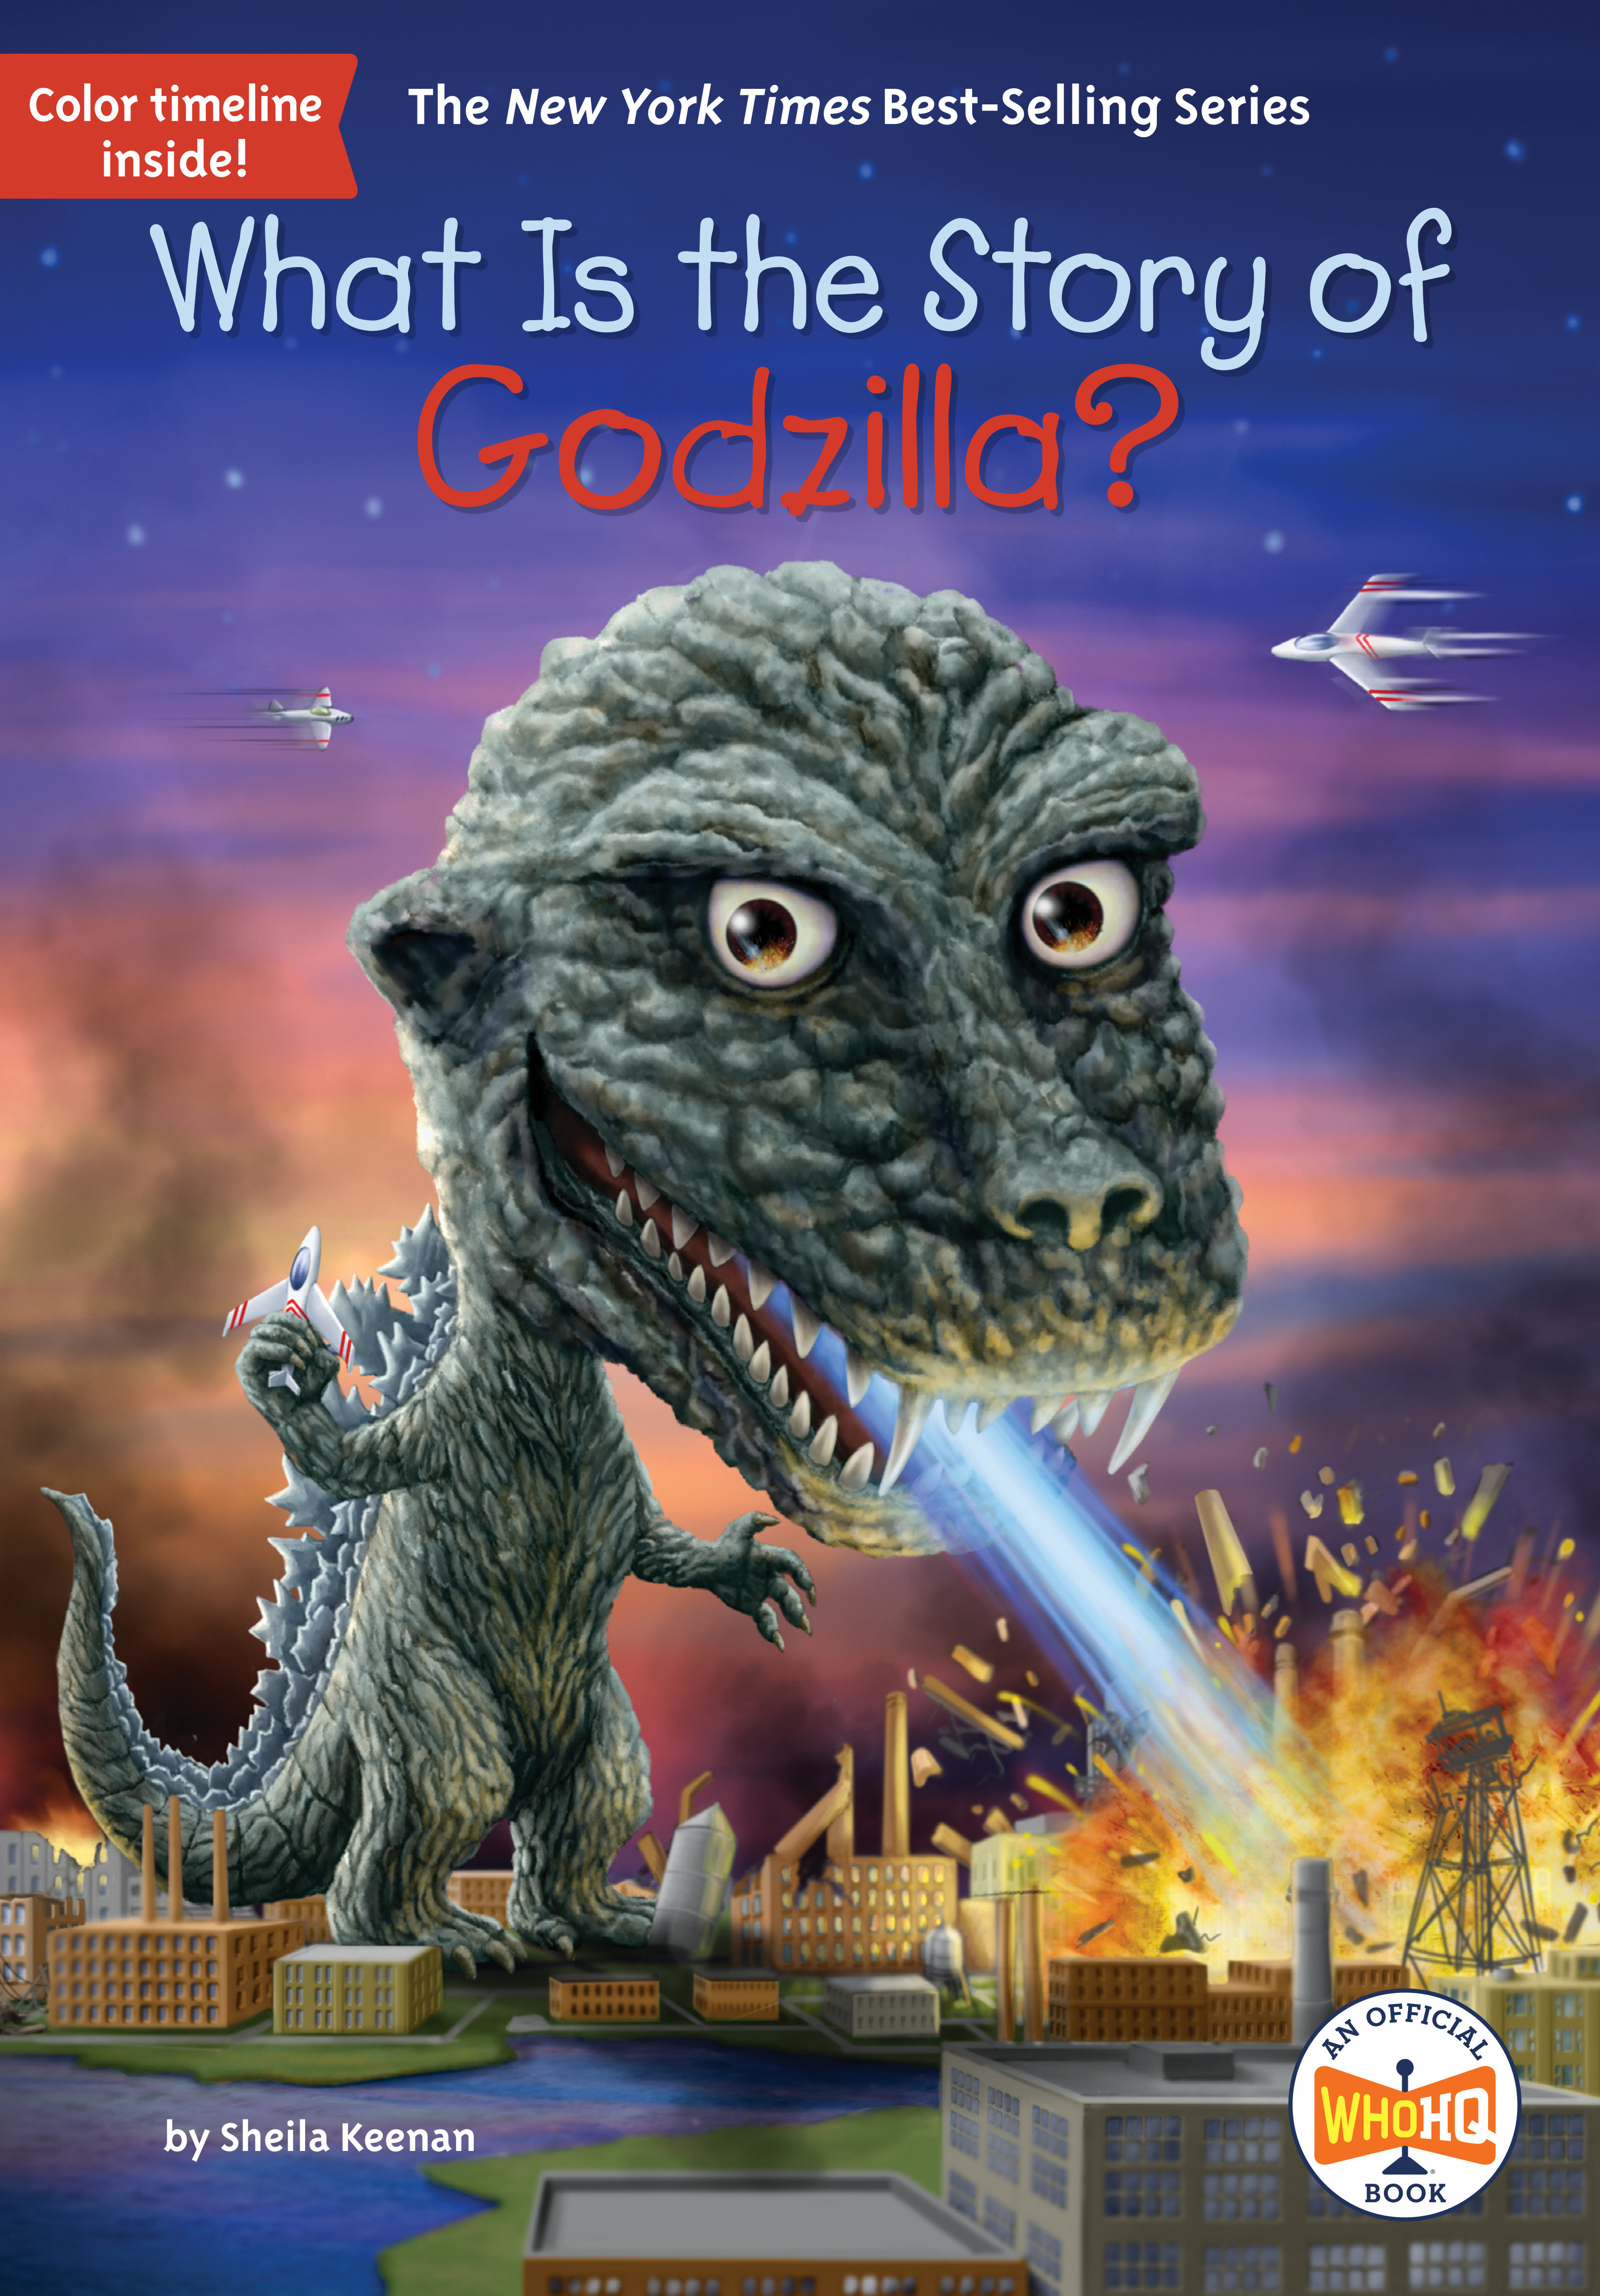 What Is the Story of Soft Cover Volume 9 The Story of Godzilla?